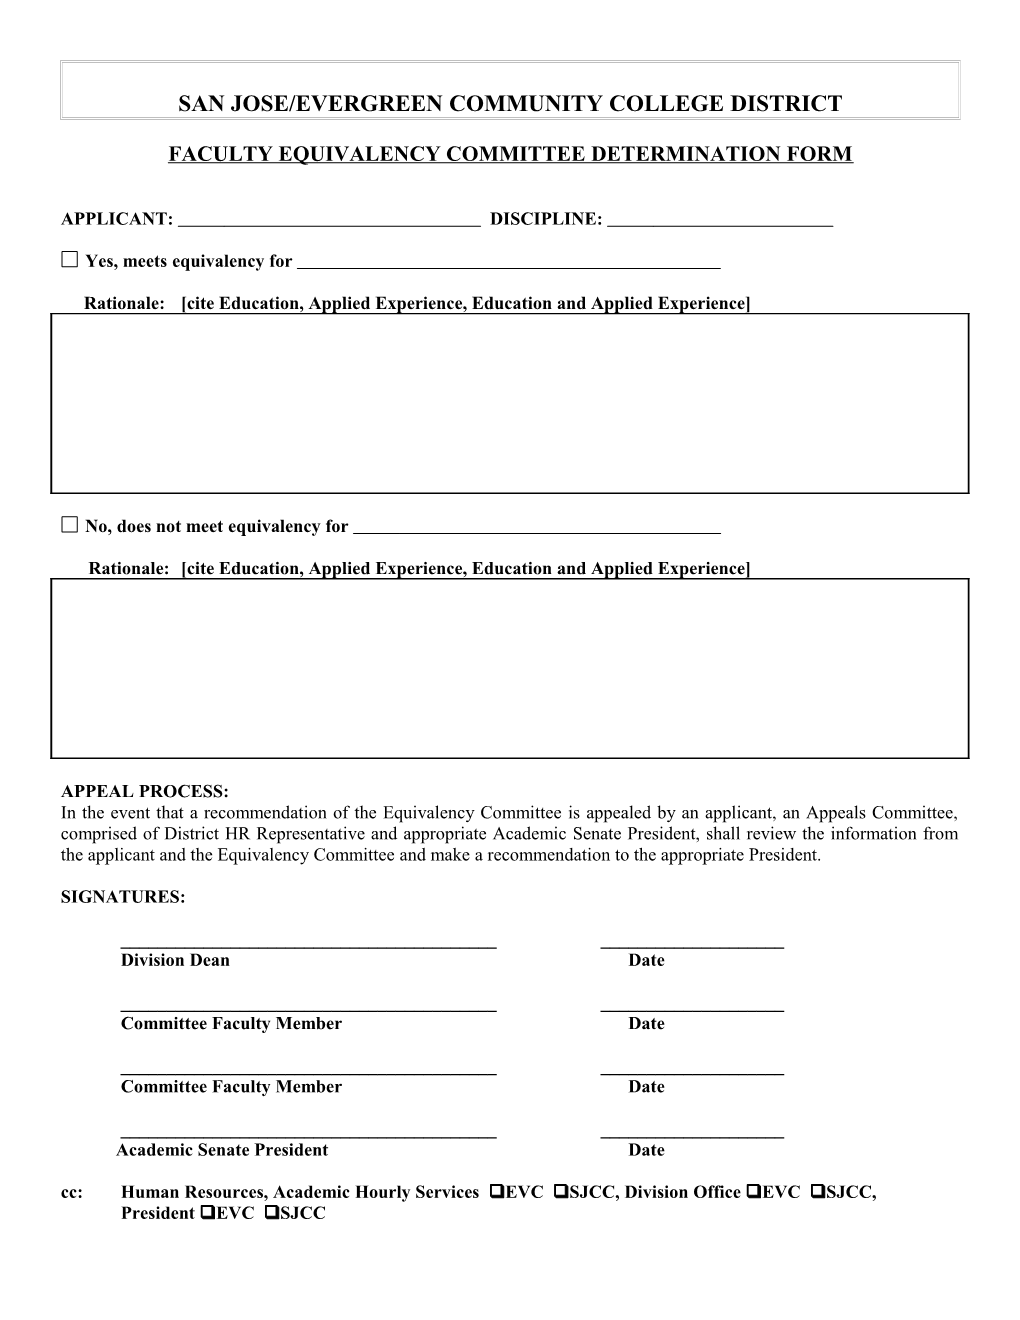 Equivalency Committee Determination Form